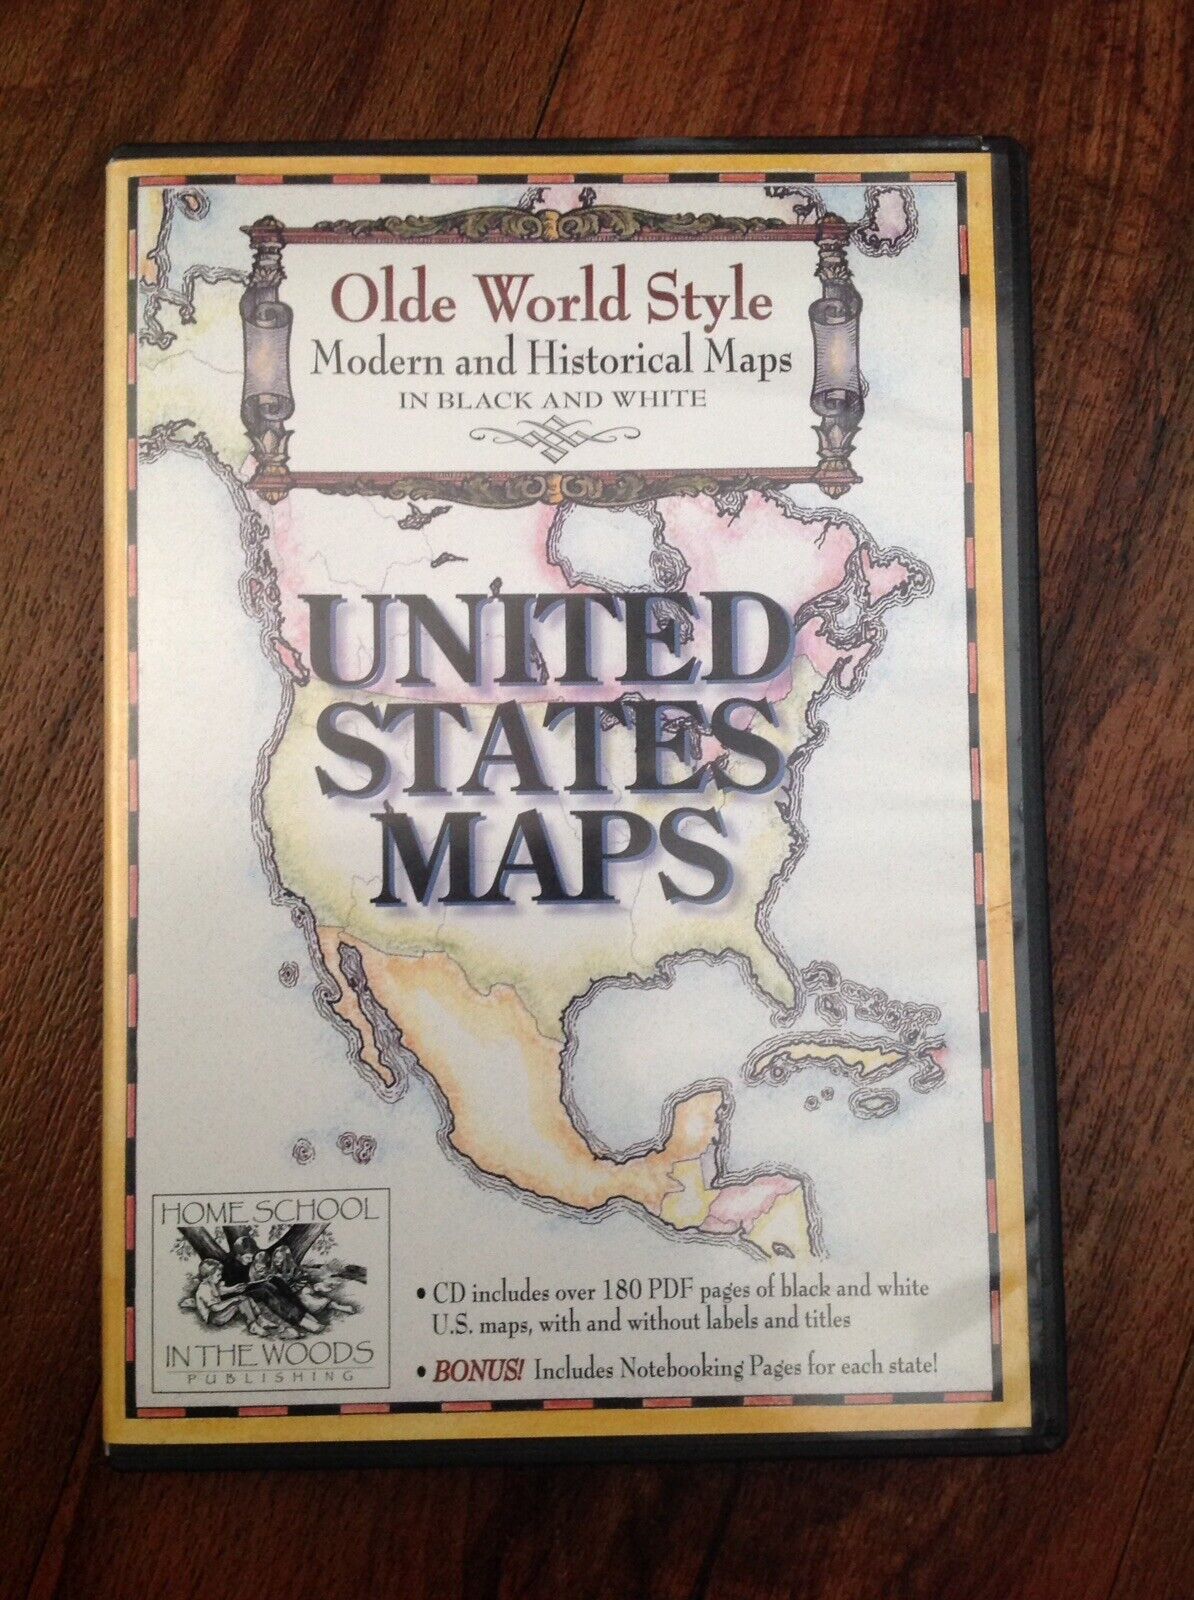 United States Maps - Olde World Style (CD-ROM 2009) Homeschool in the Woods